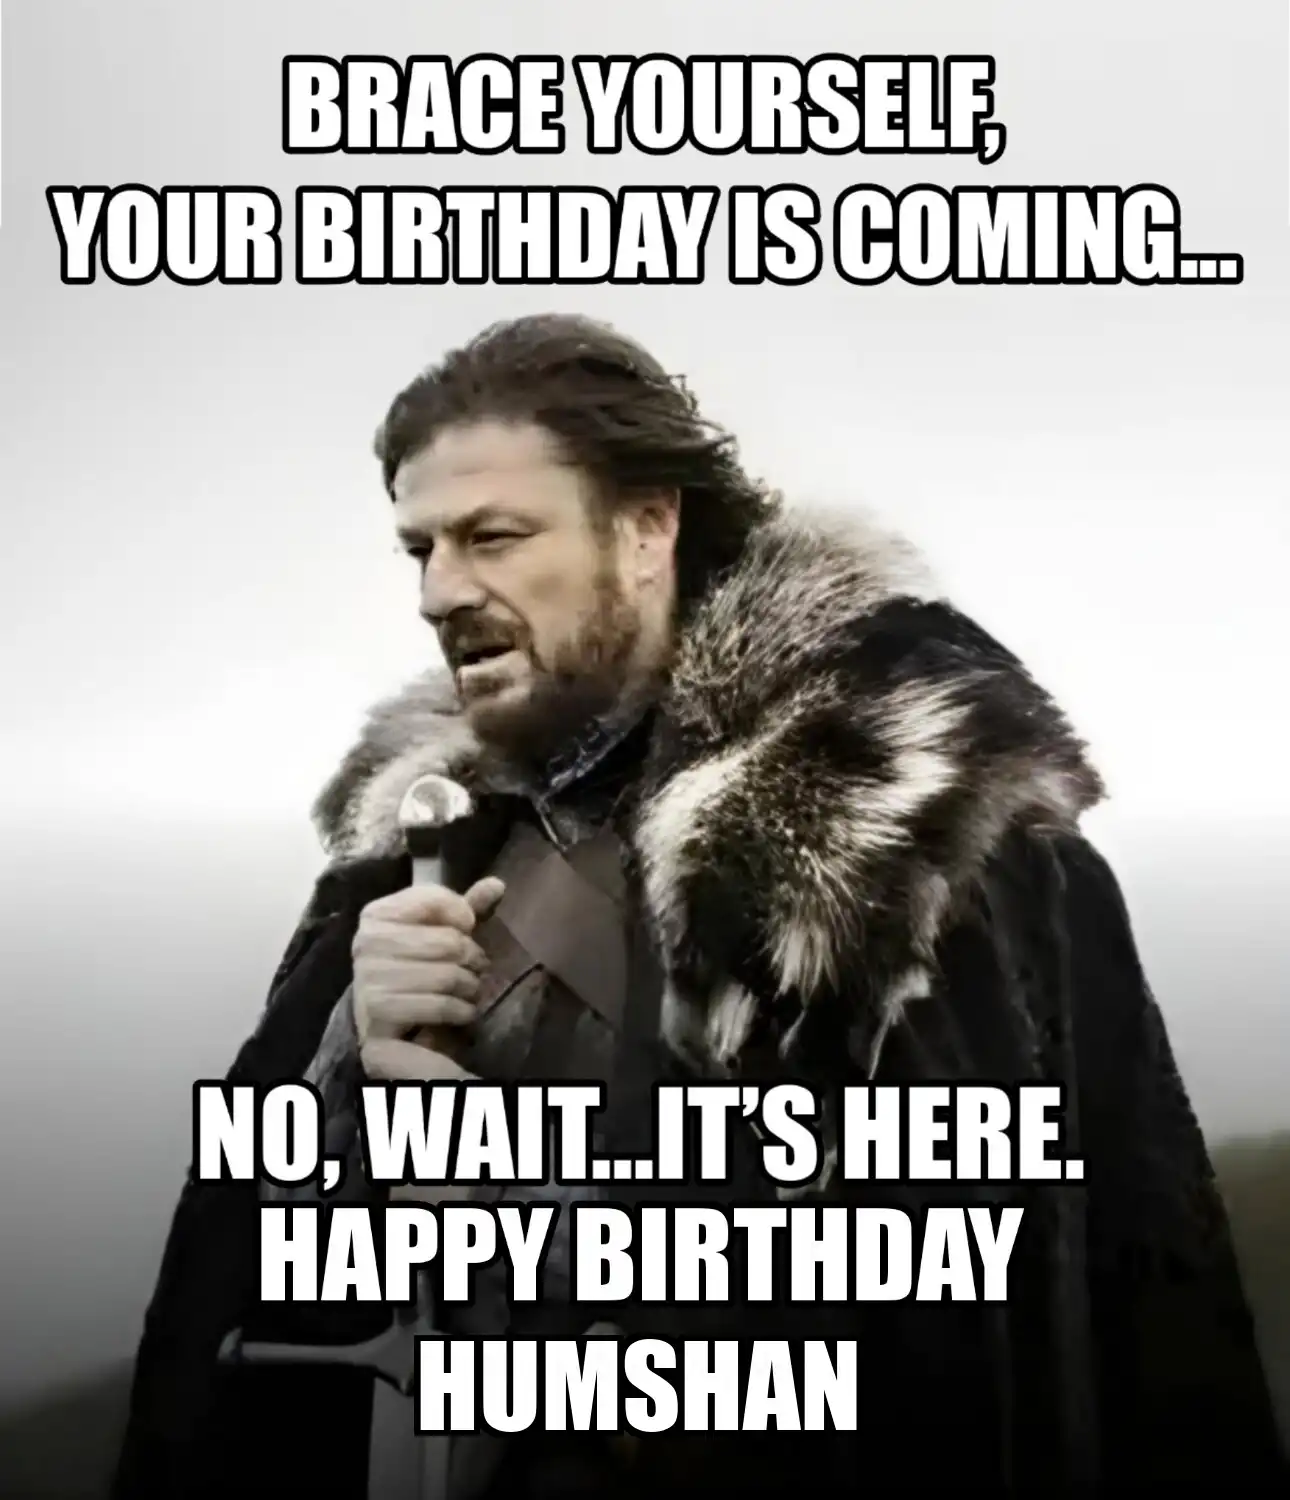 Happy Birthday Humshan Brace Yourself Your Birthday Is Coming Meme